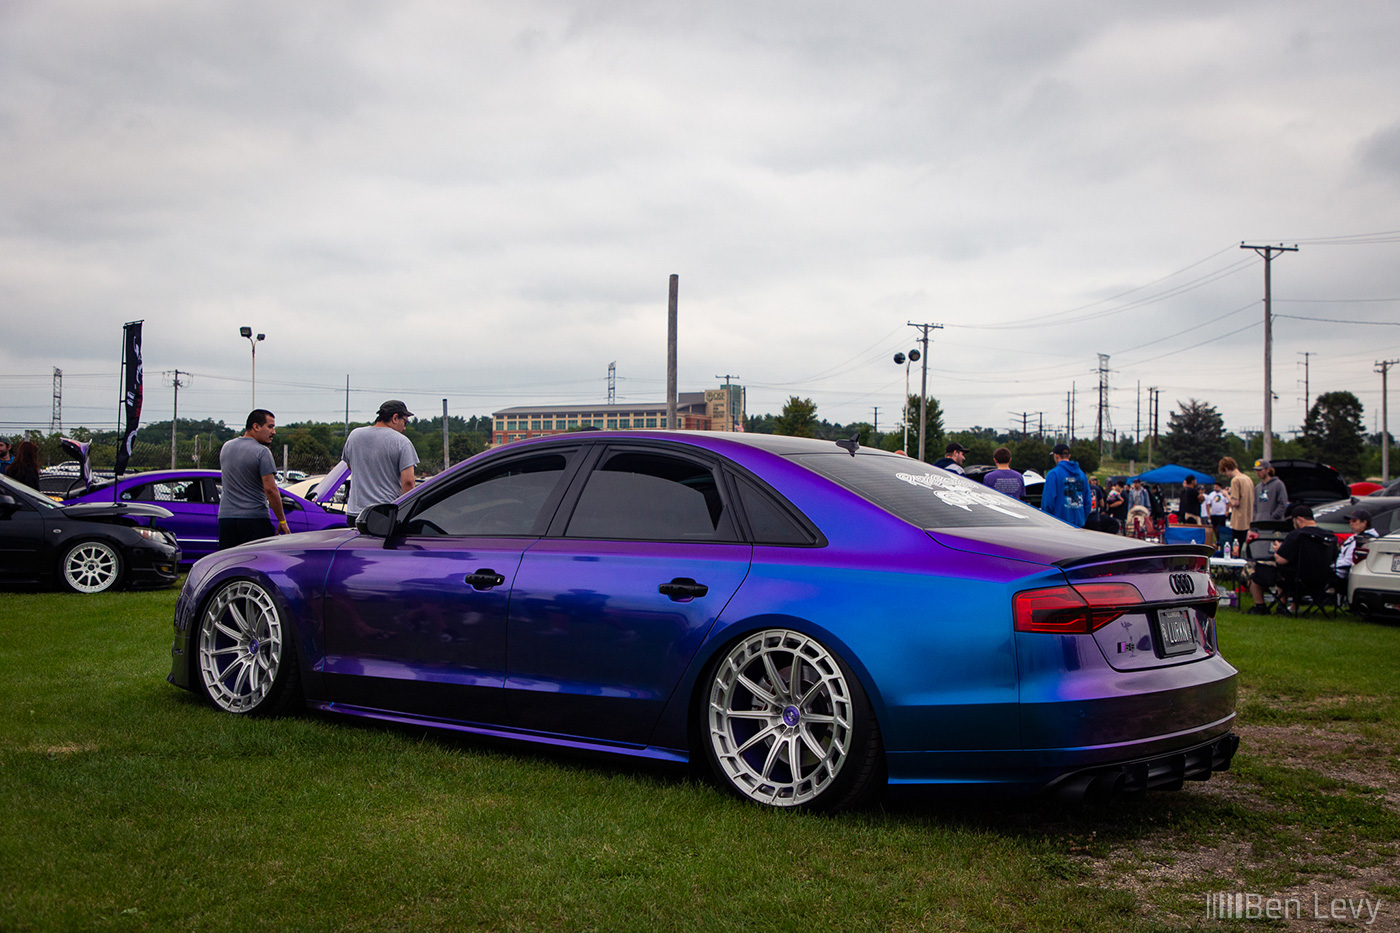 Audi S8 with in Bluish-Purple Color